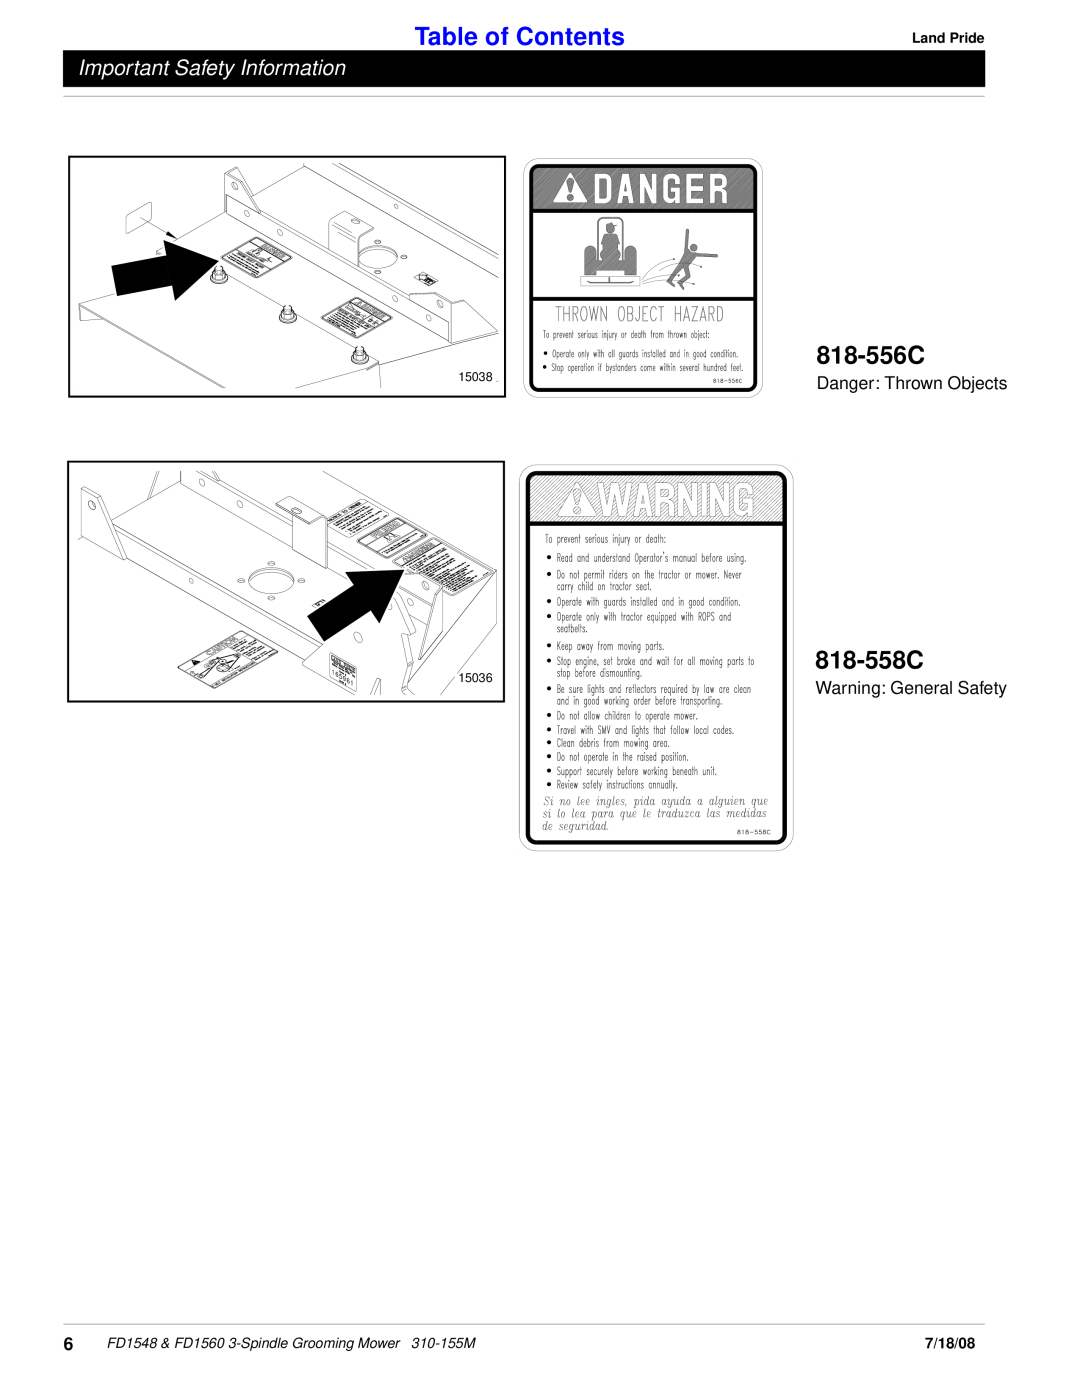 Land Pride fd1548 manual 818-556C, 818-558C, Table of Contents, Important Safety Information, Land Pride, 7/18/08 